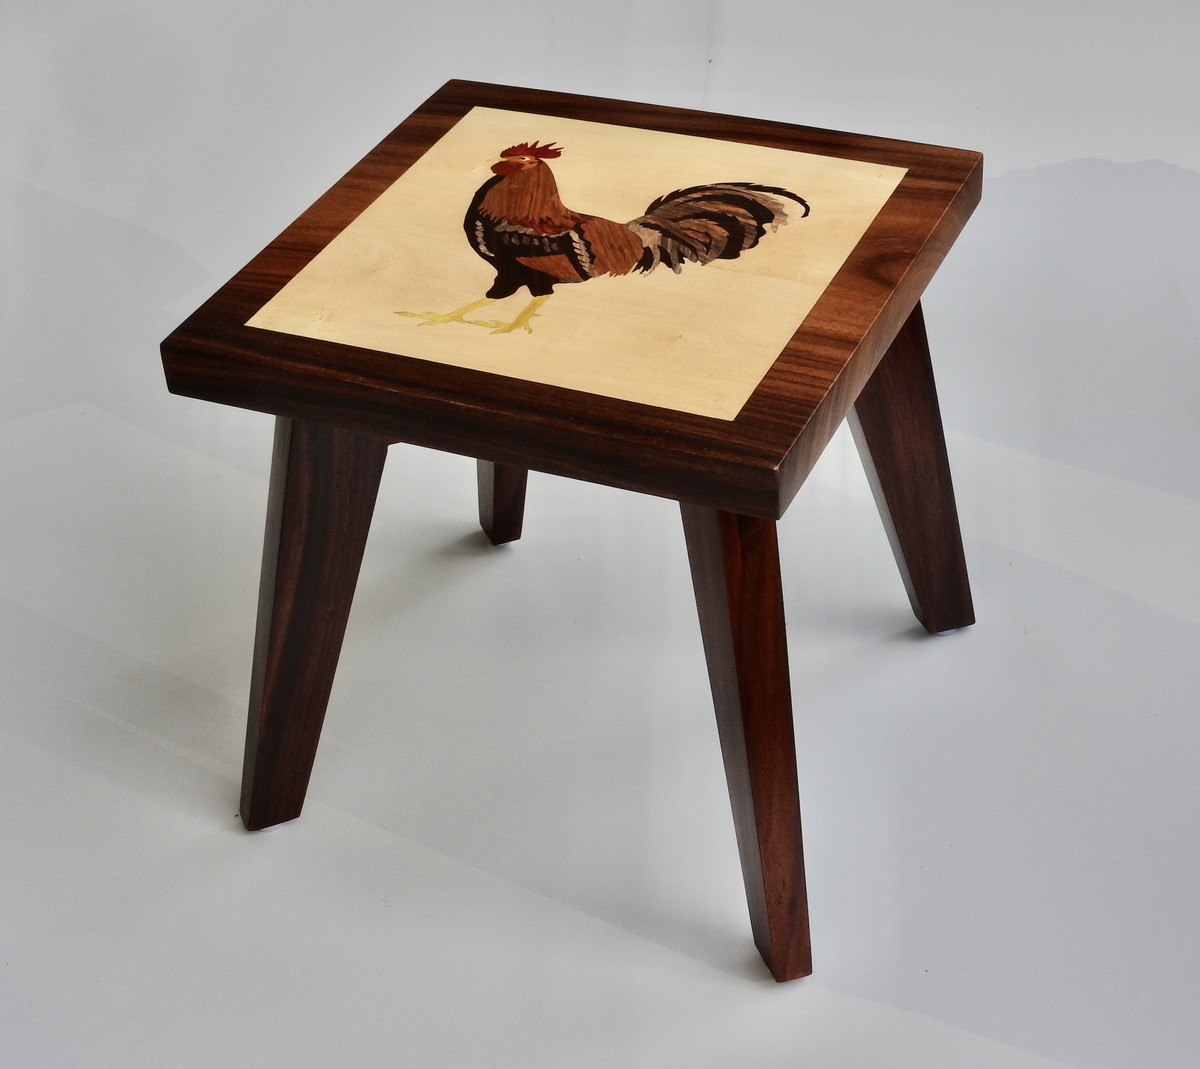 The Rooster Table by The Beehive India